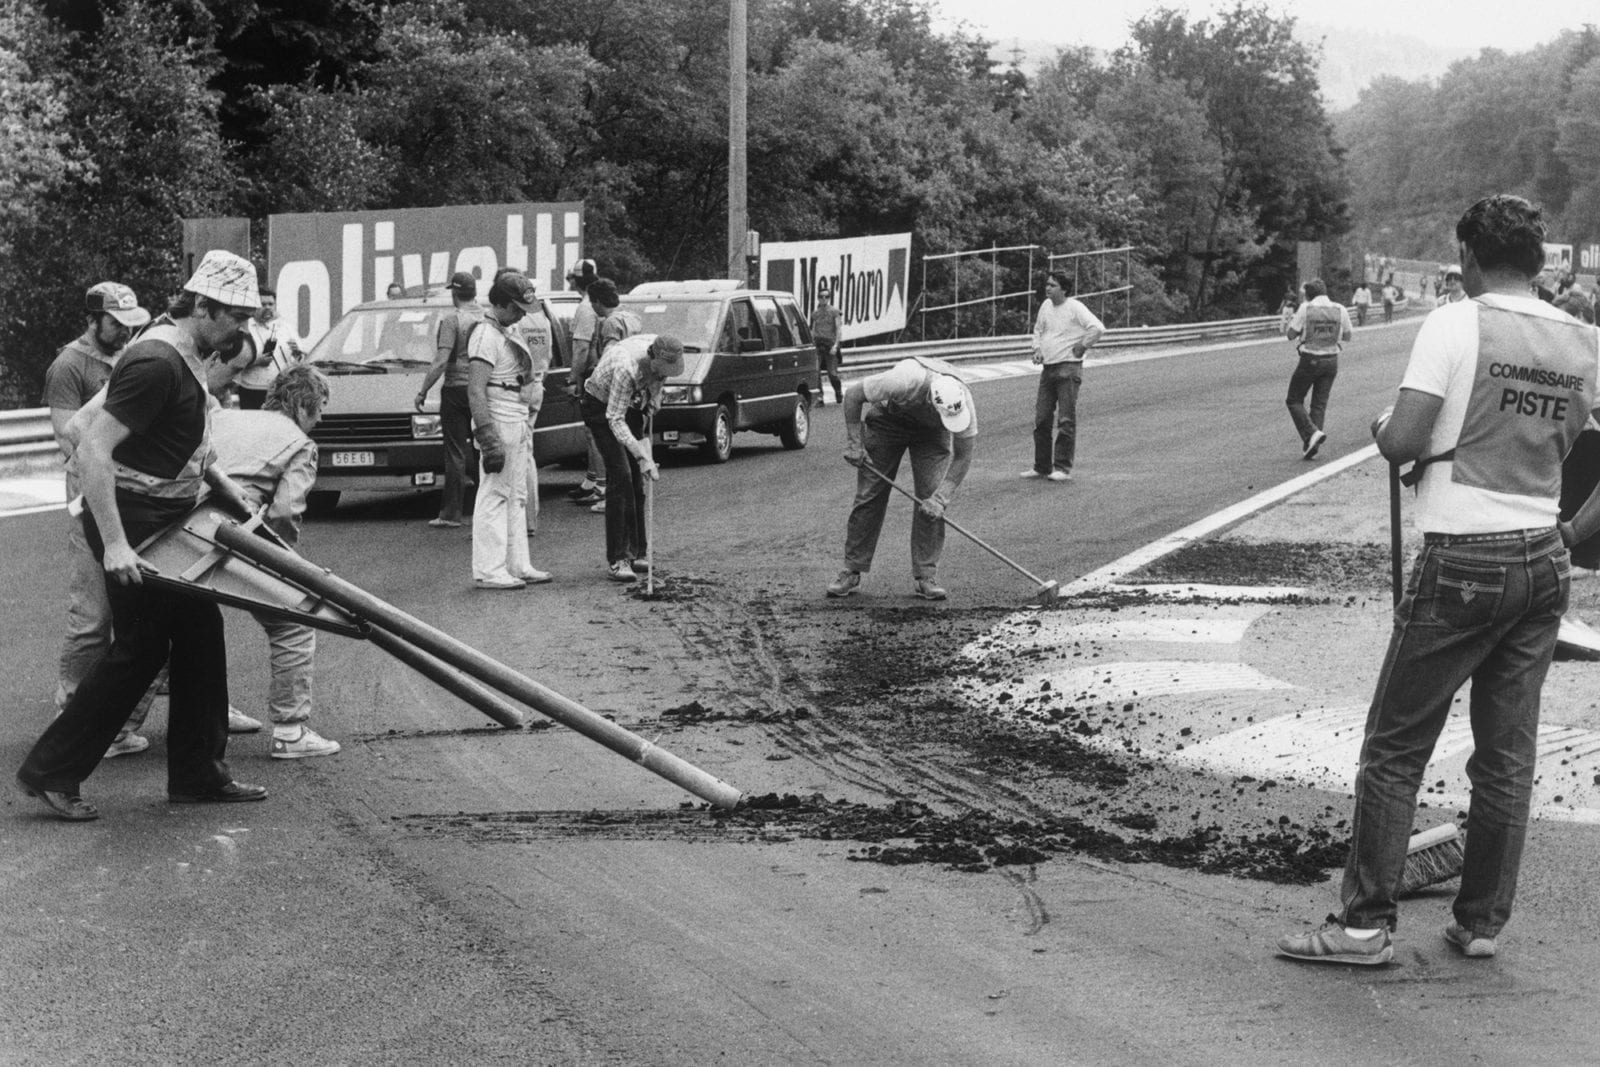 Workers try to repair the broken track surface ahead of the cancelled 1985 Belgian grand Prix